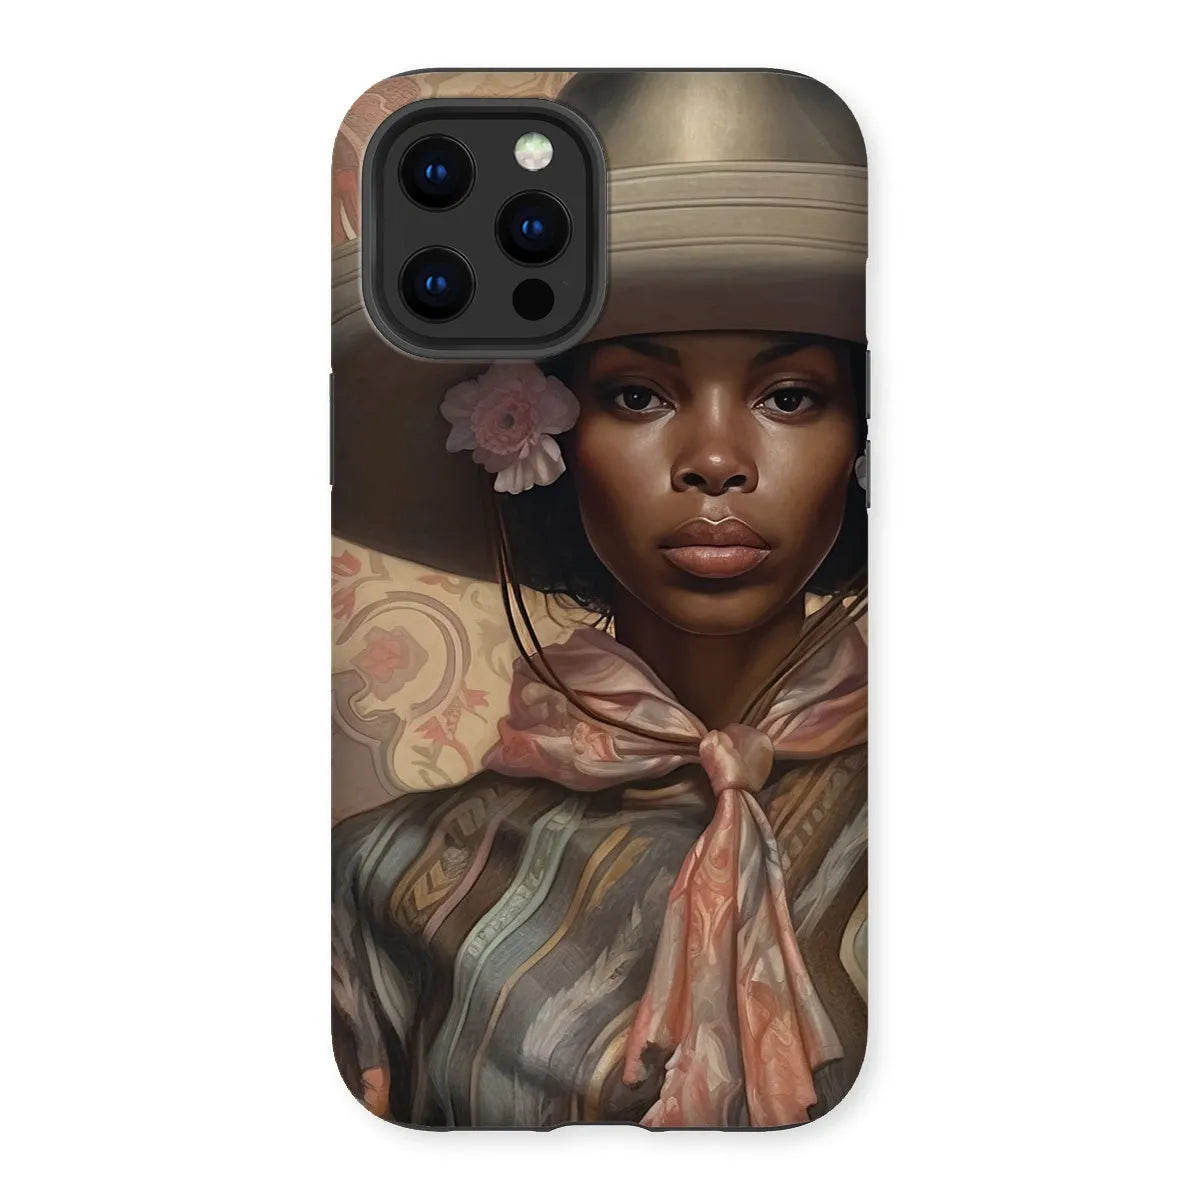 Sadie The Lesbian Cowgirl - Sapphic Art Phone Case - Iphone 12 Pro Max / Matte - Mobile Phone Cases - Aesthetic Art